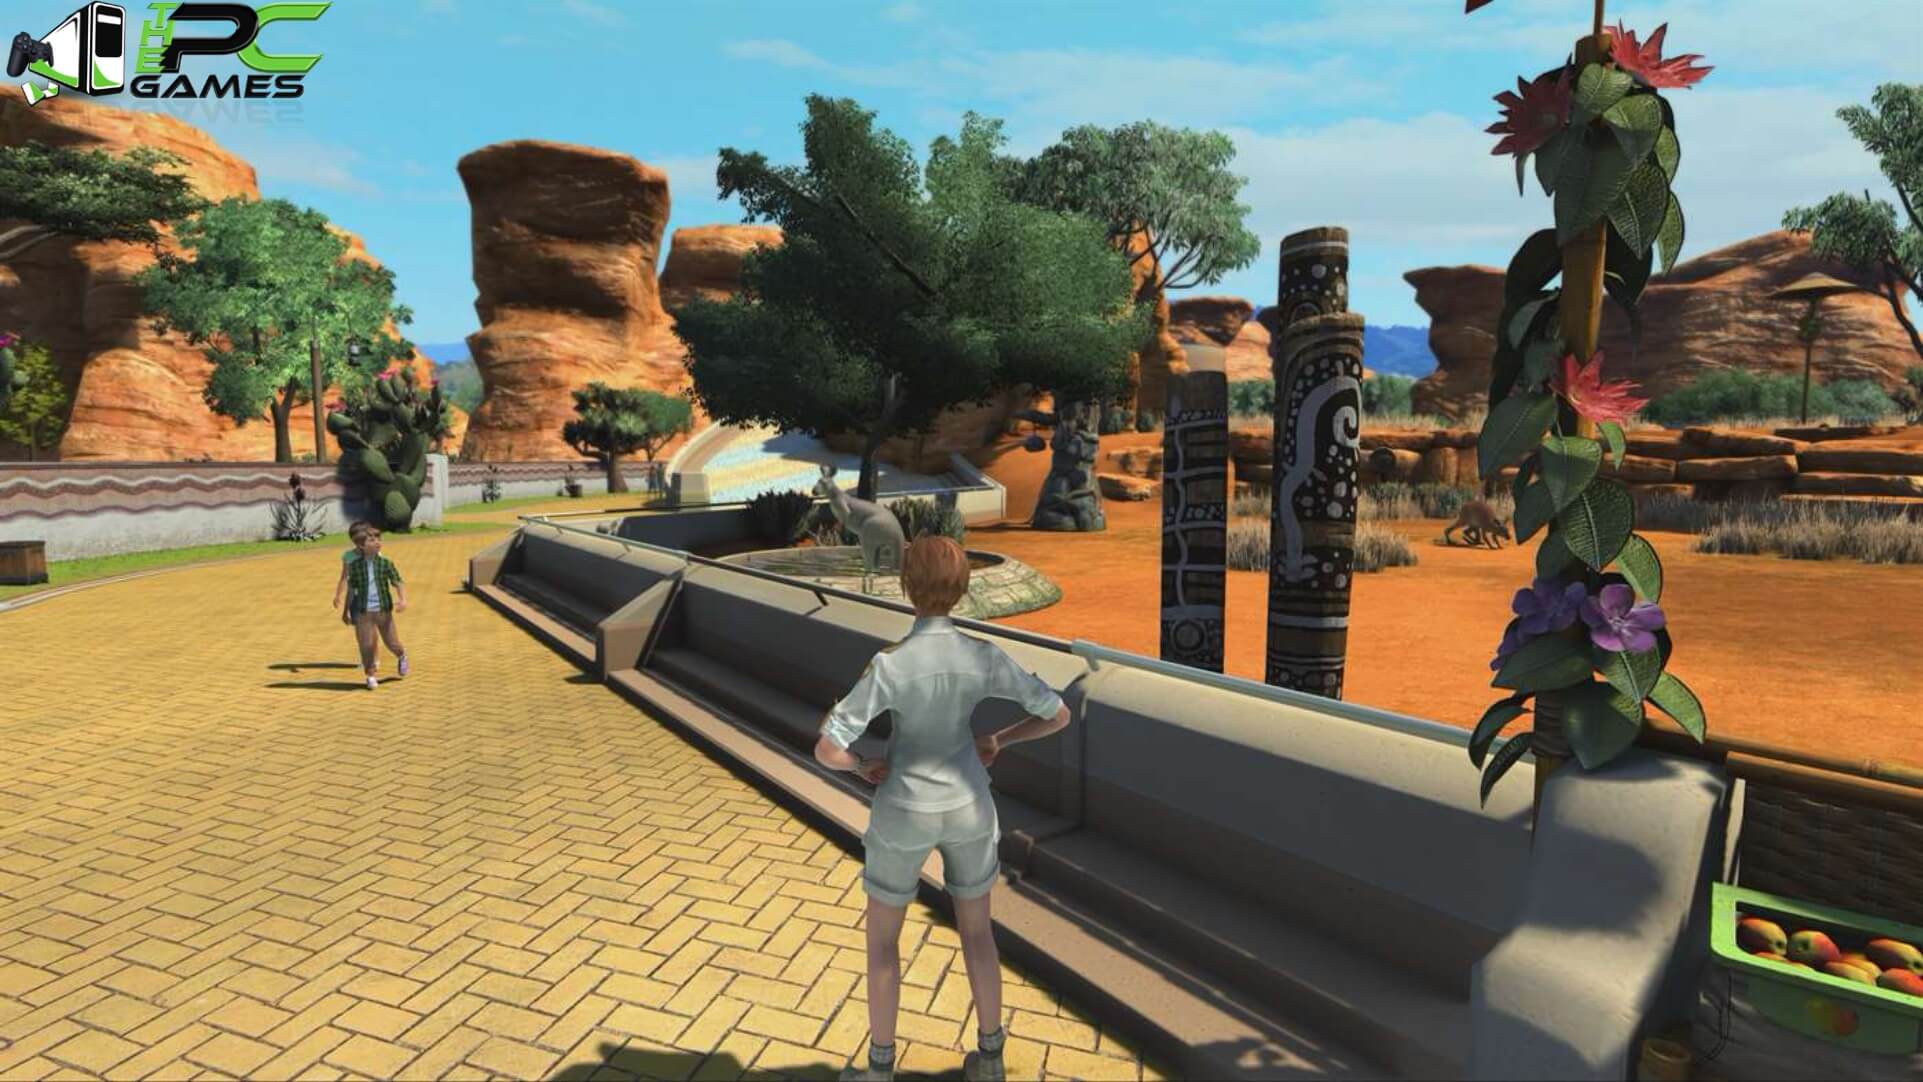 Zoo tycoon 2 game free download full version for pc